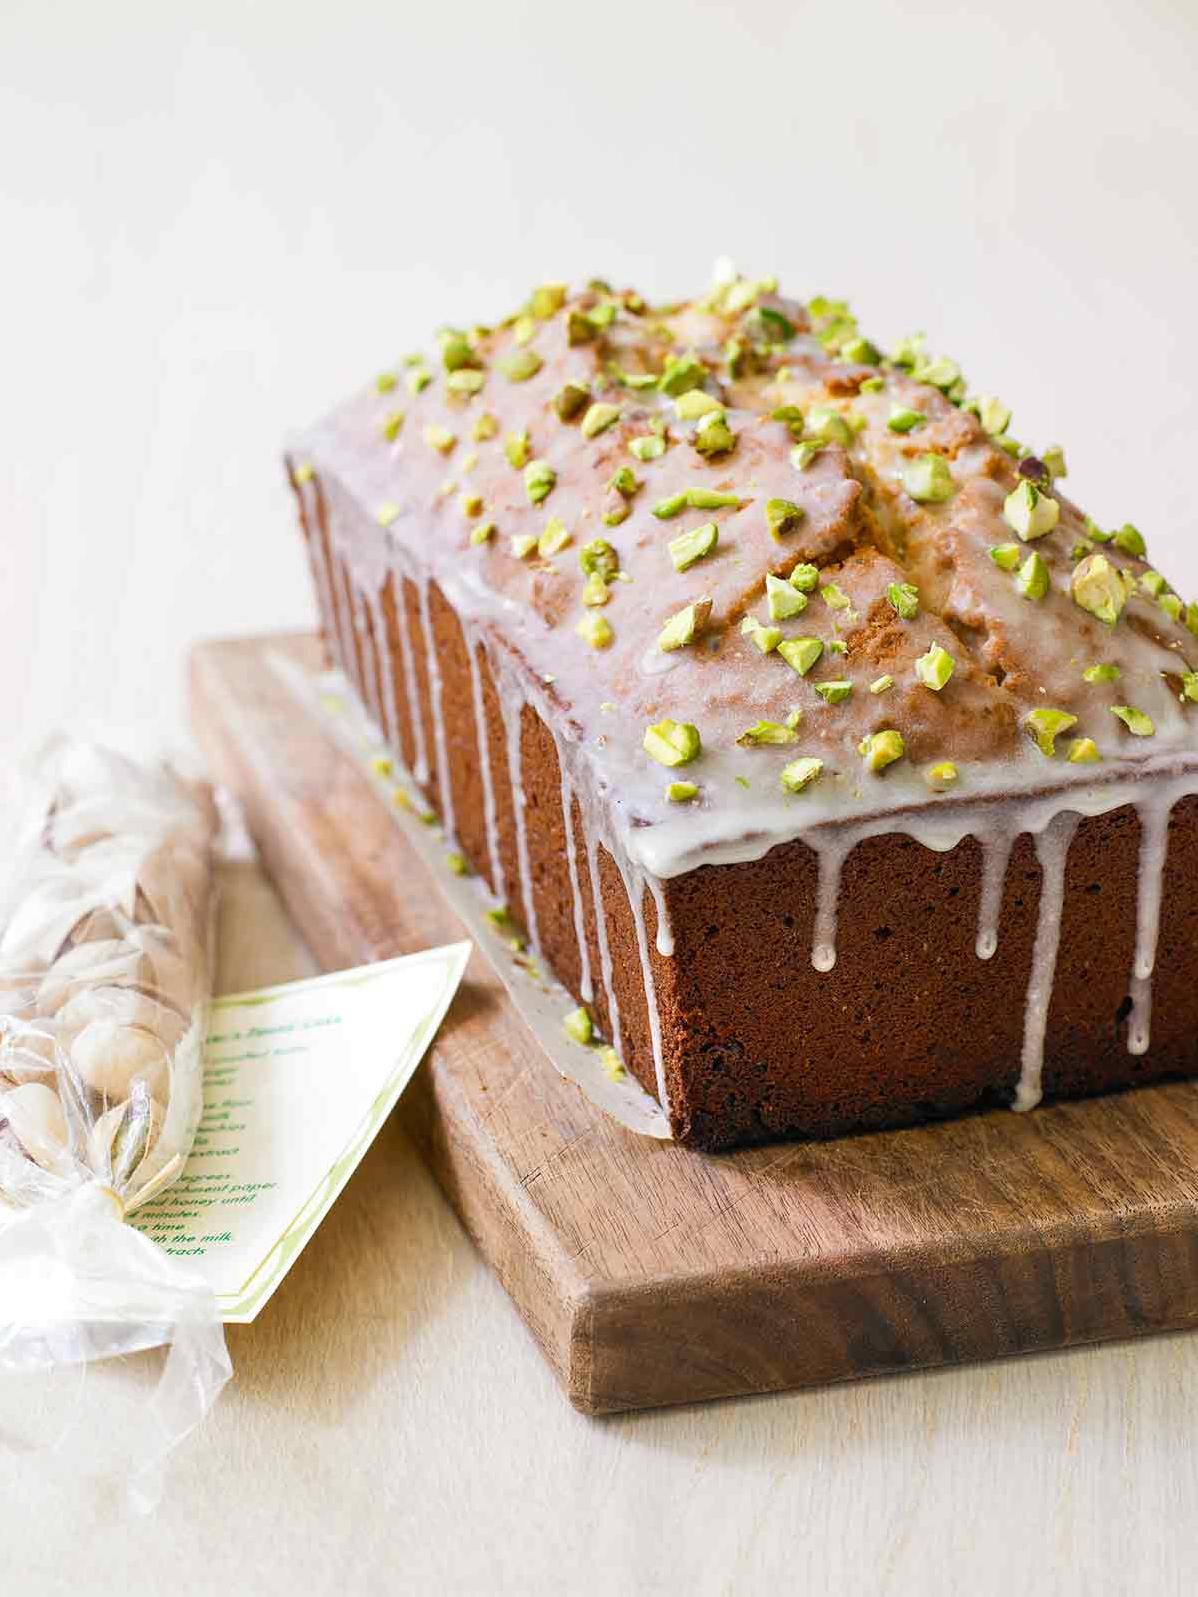  Say hello to my fluffy and flavorful Pistachio Pound Cake.